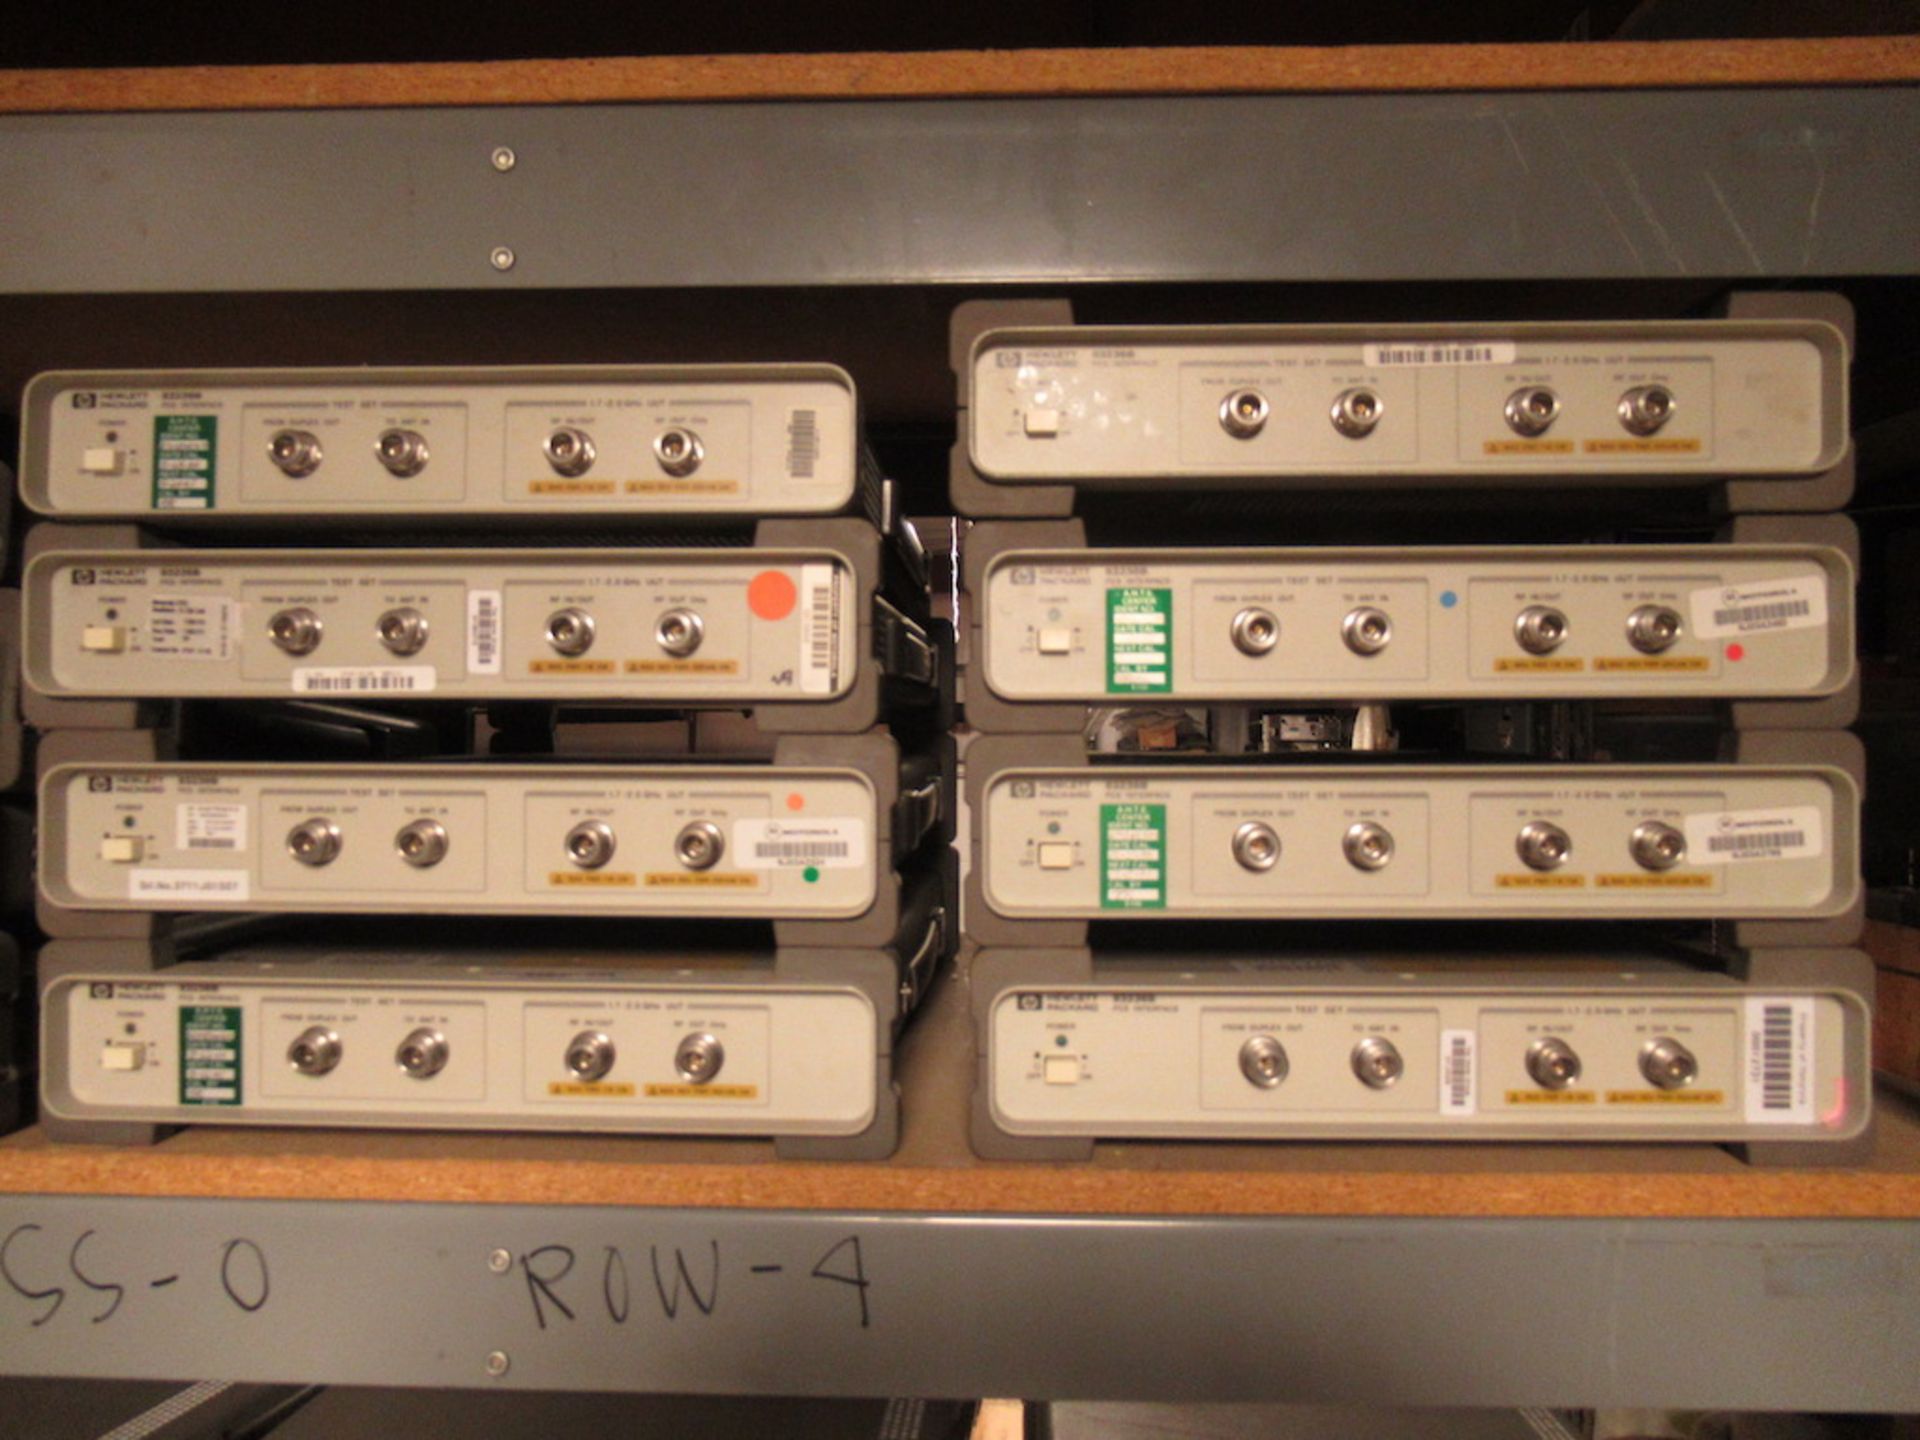 Lot to include entire rack: (22) HP 83236B PCS Interface , (1)v HP 83206A TDMA Cellular Adapter, - Image 3 of 23